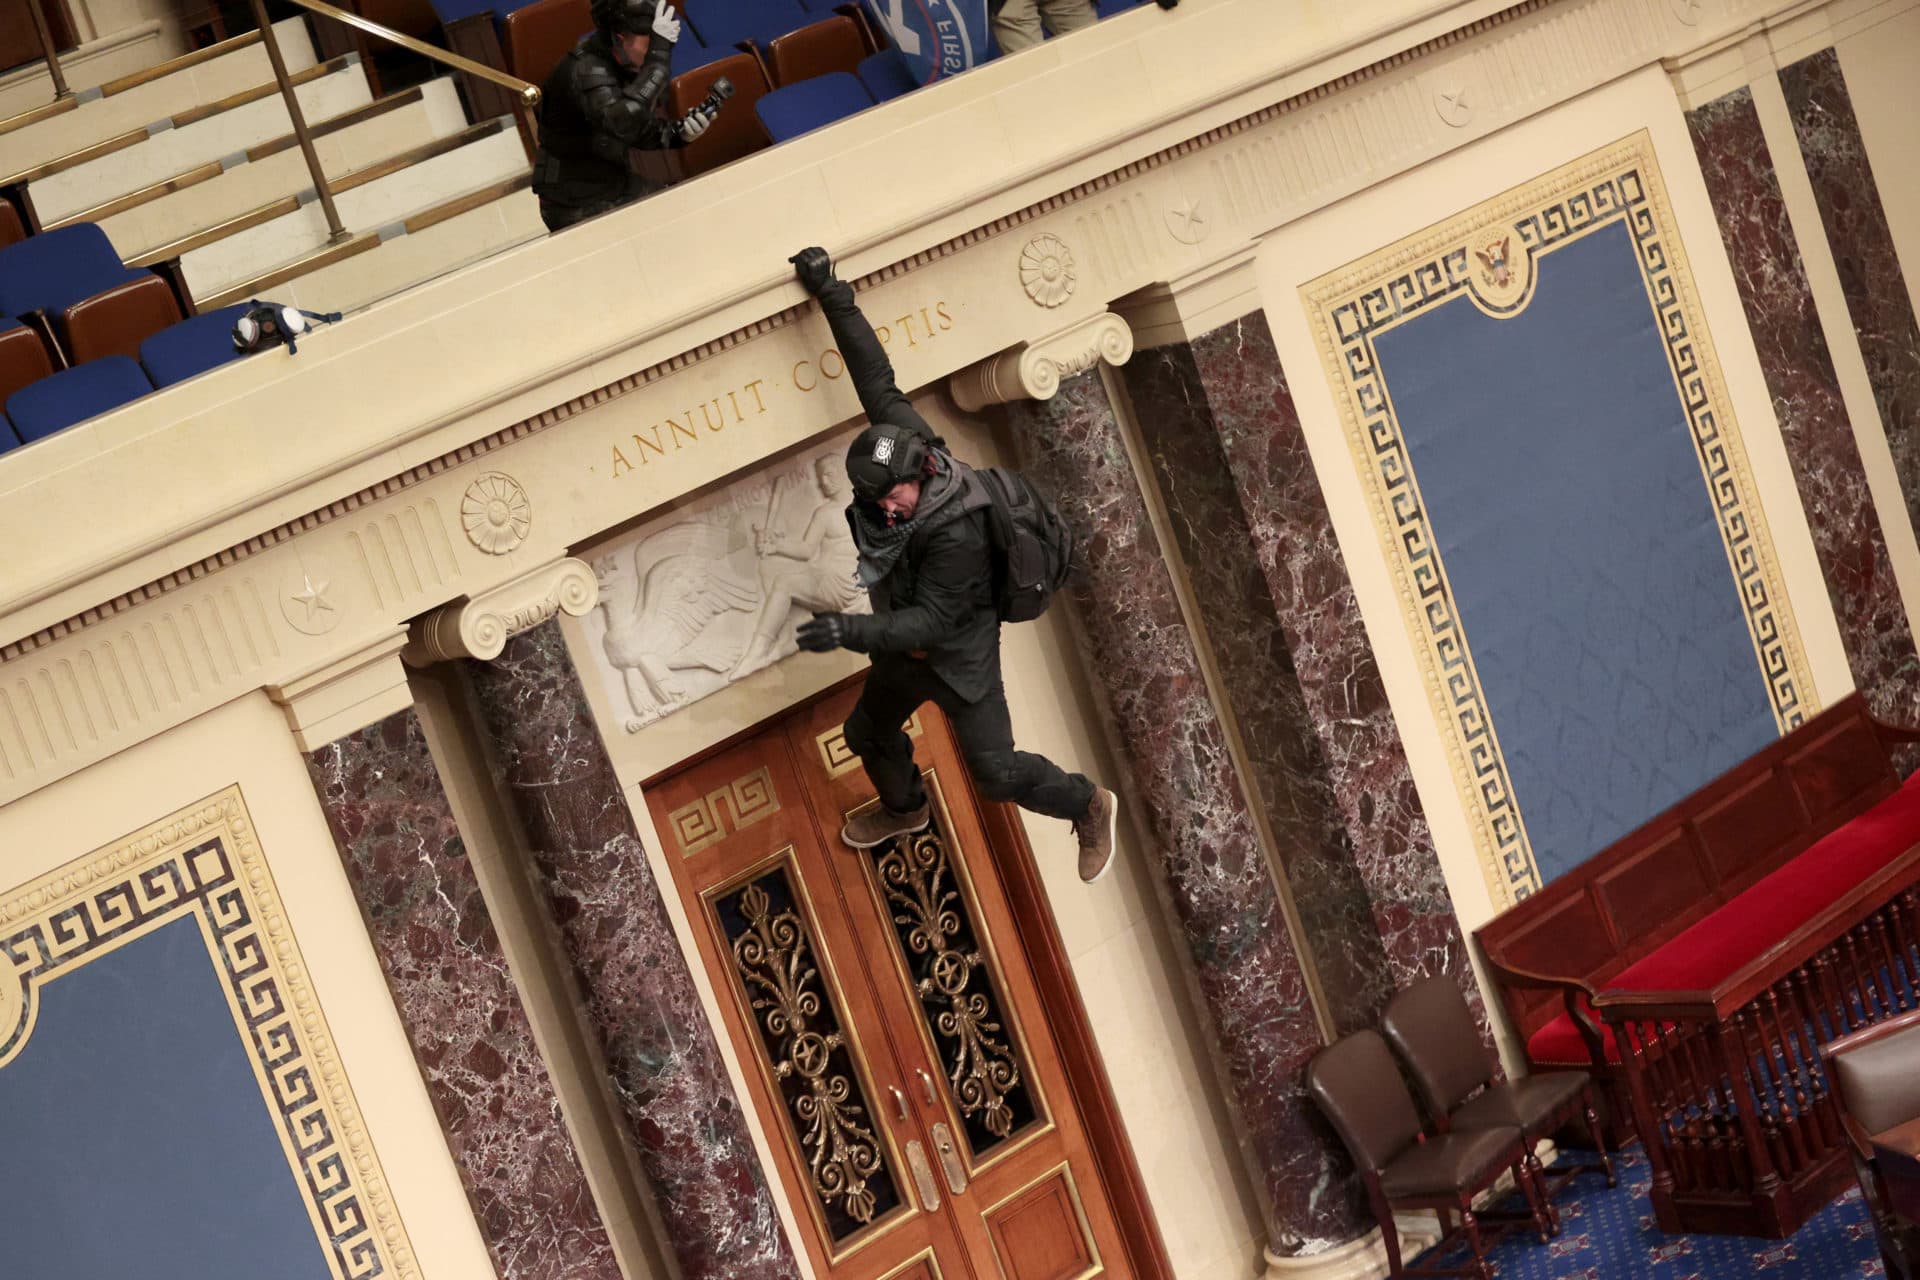 A protester is seen hanging from the balcony in the Senate Chamber. (Win McNamee/Getty Images)